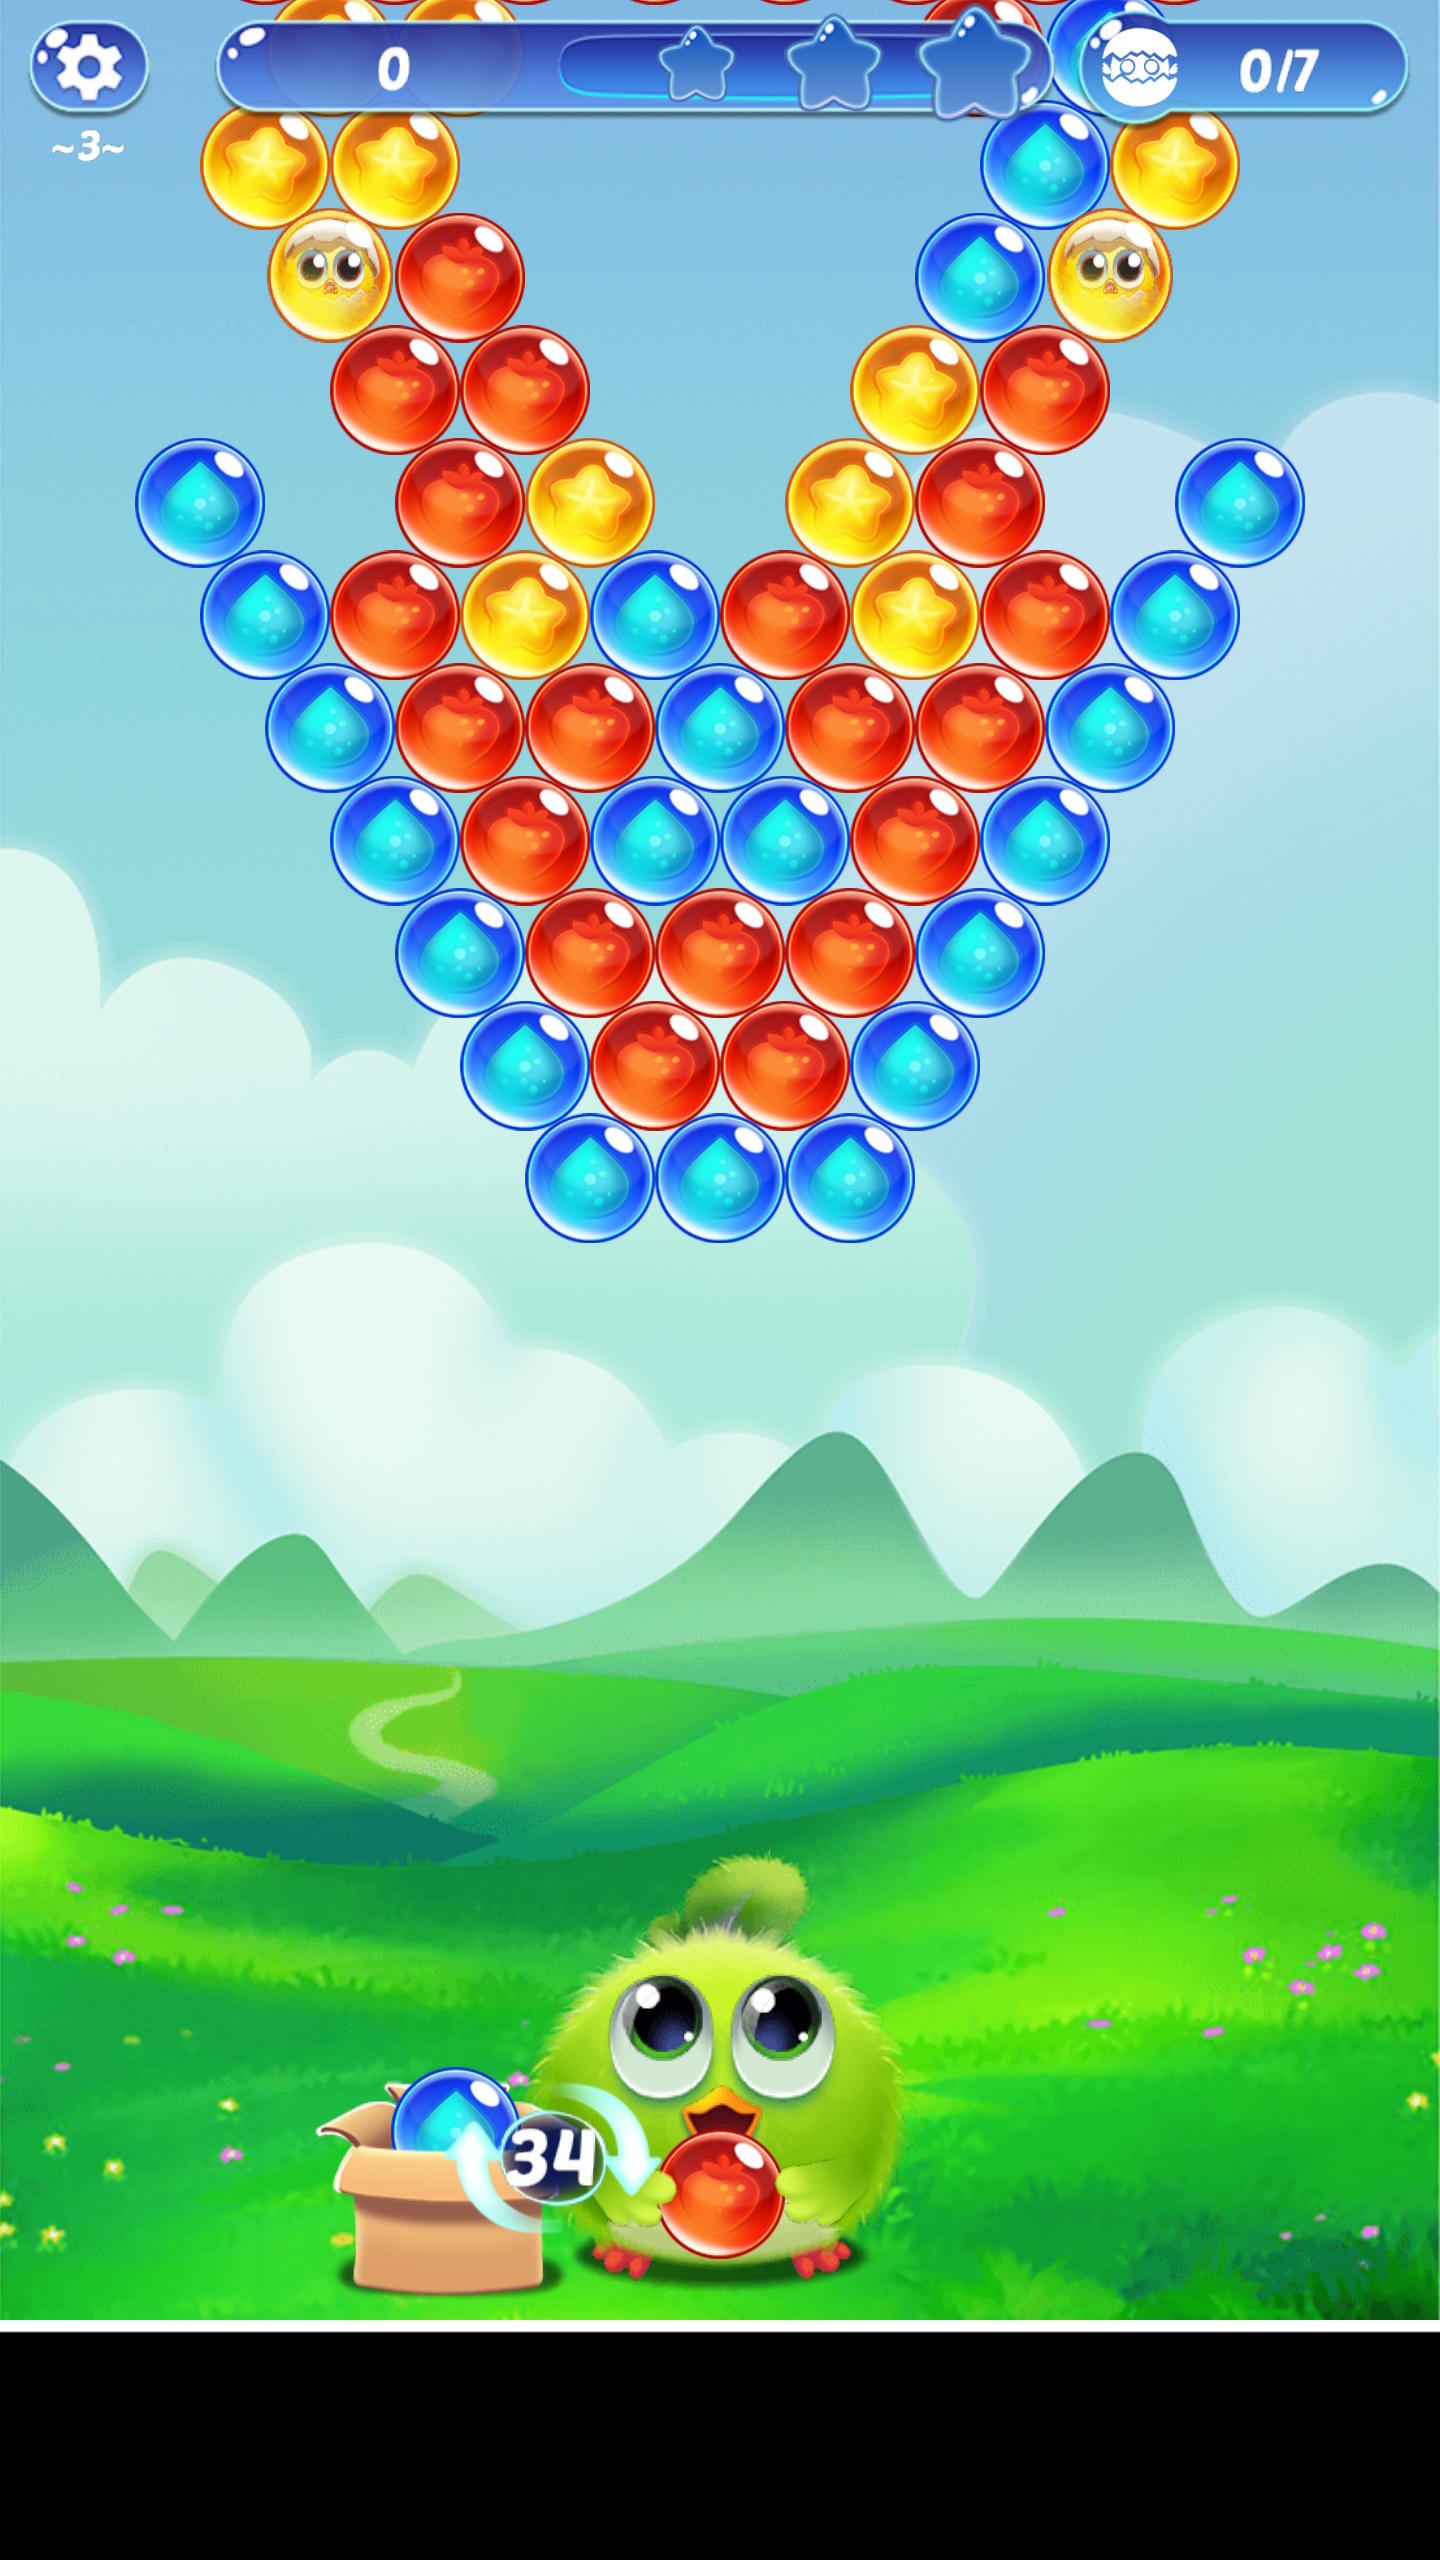 Download Bubble Shooter (MOD) APK for Android